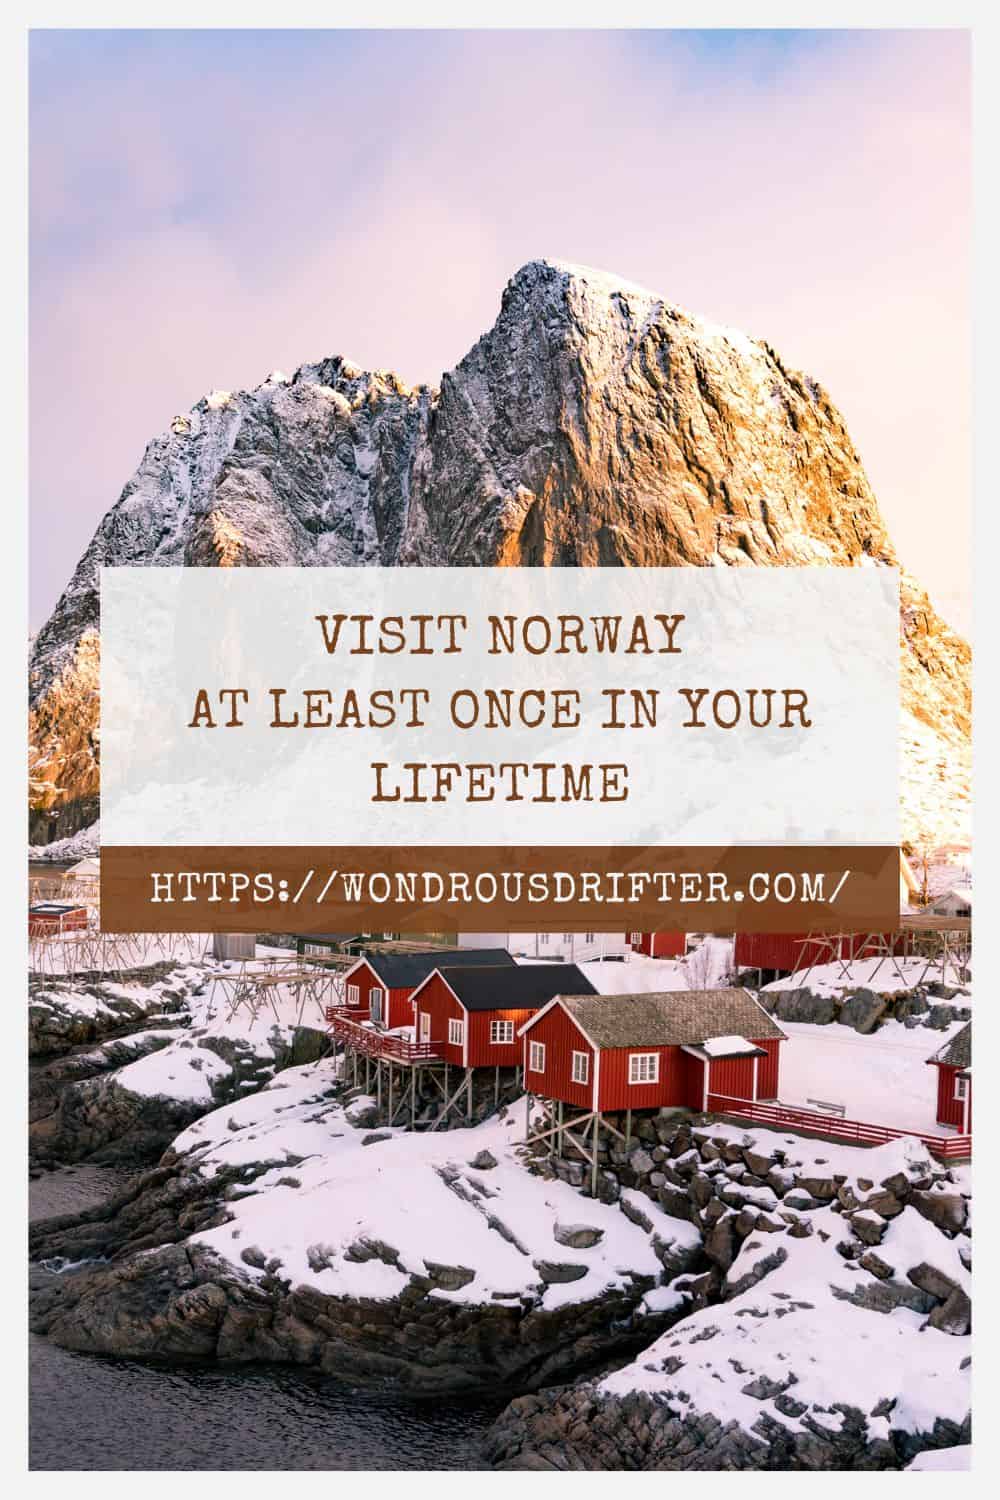 Visit Norway at least once in your lifetime